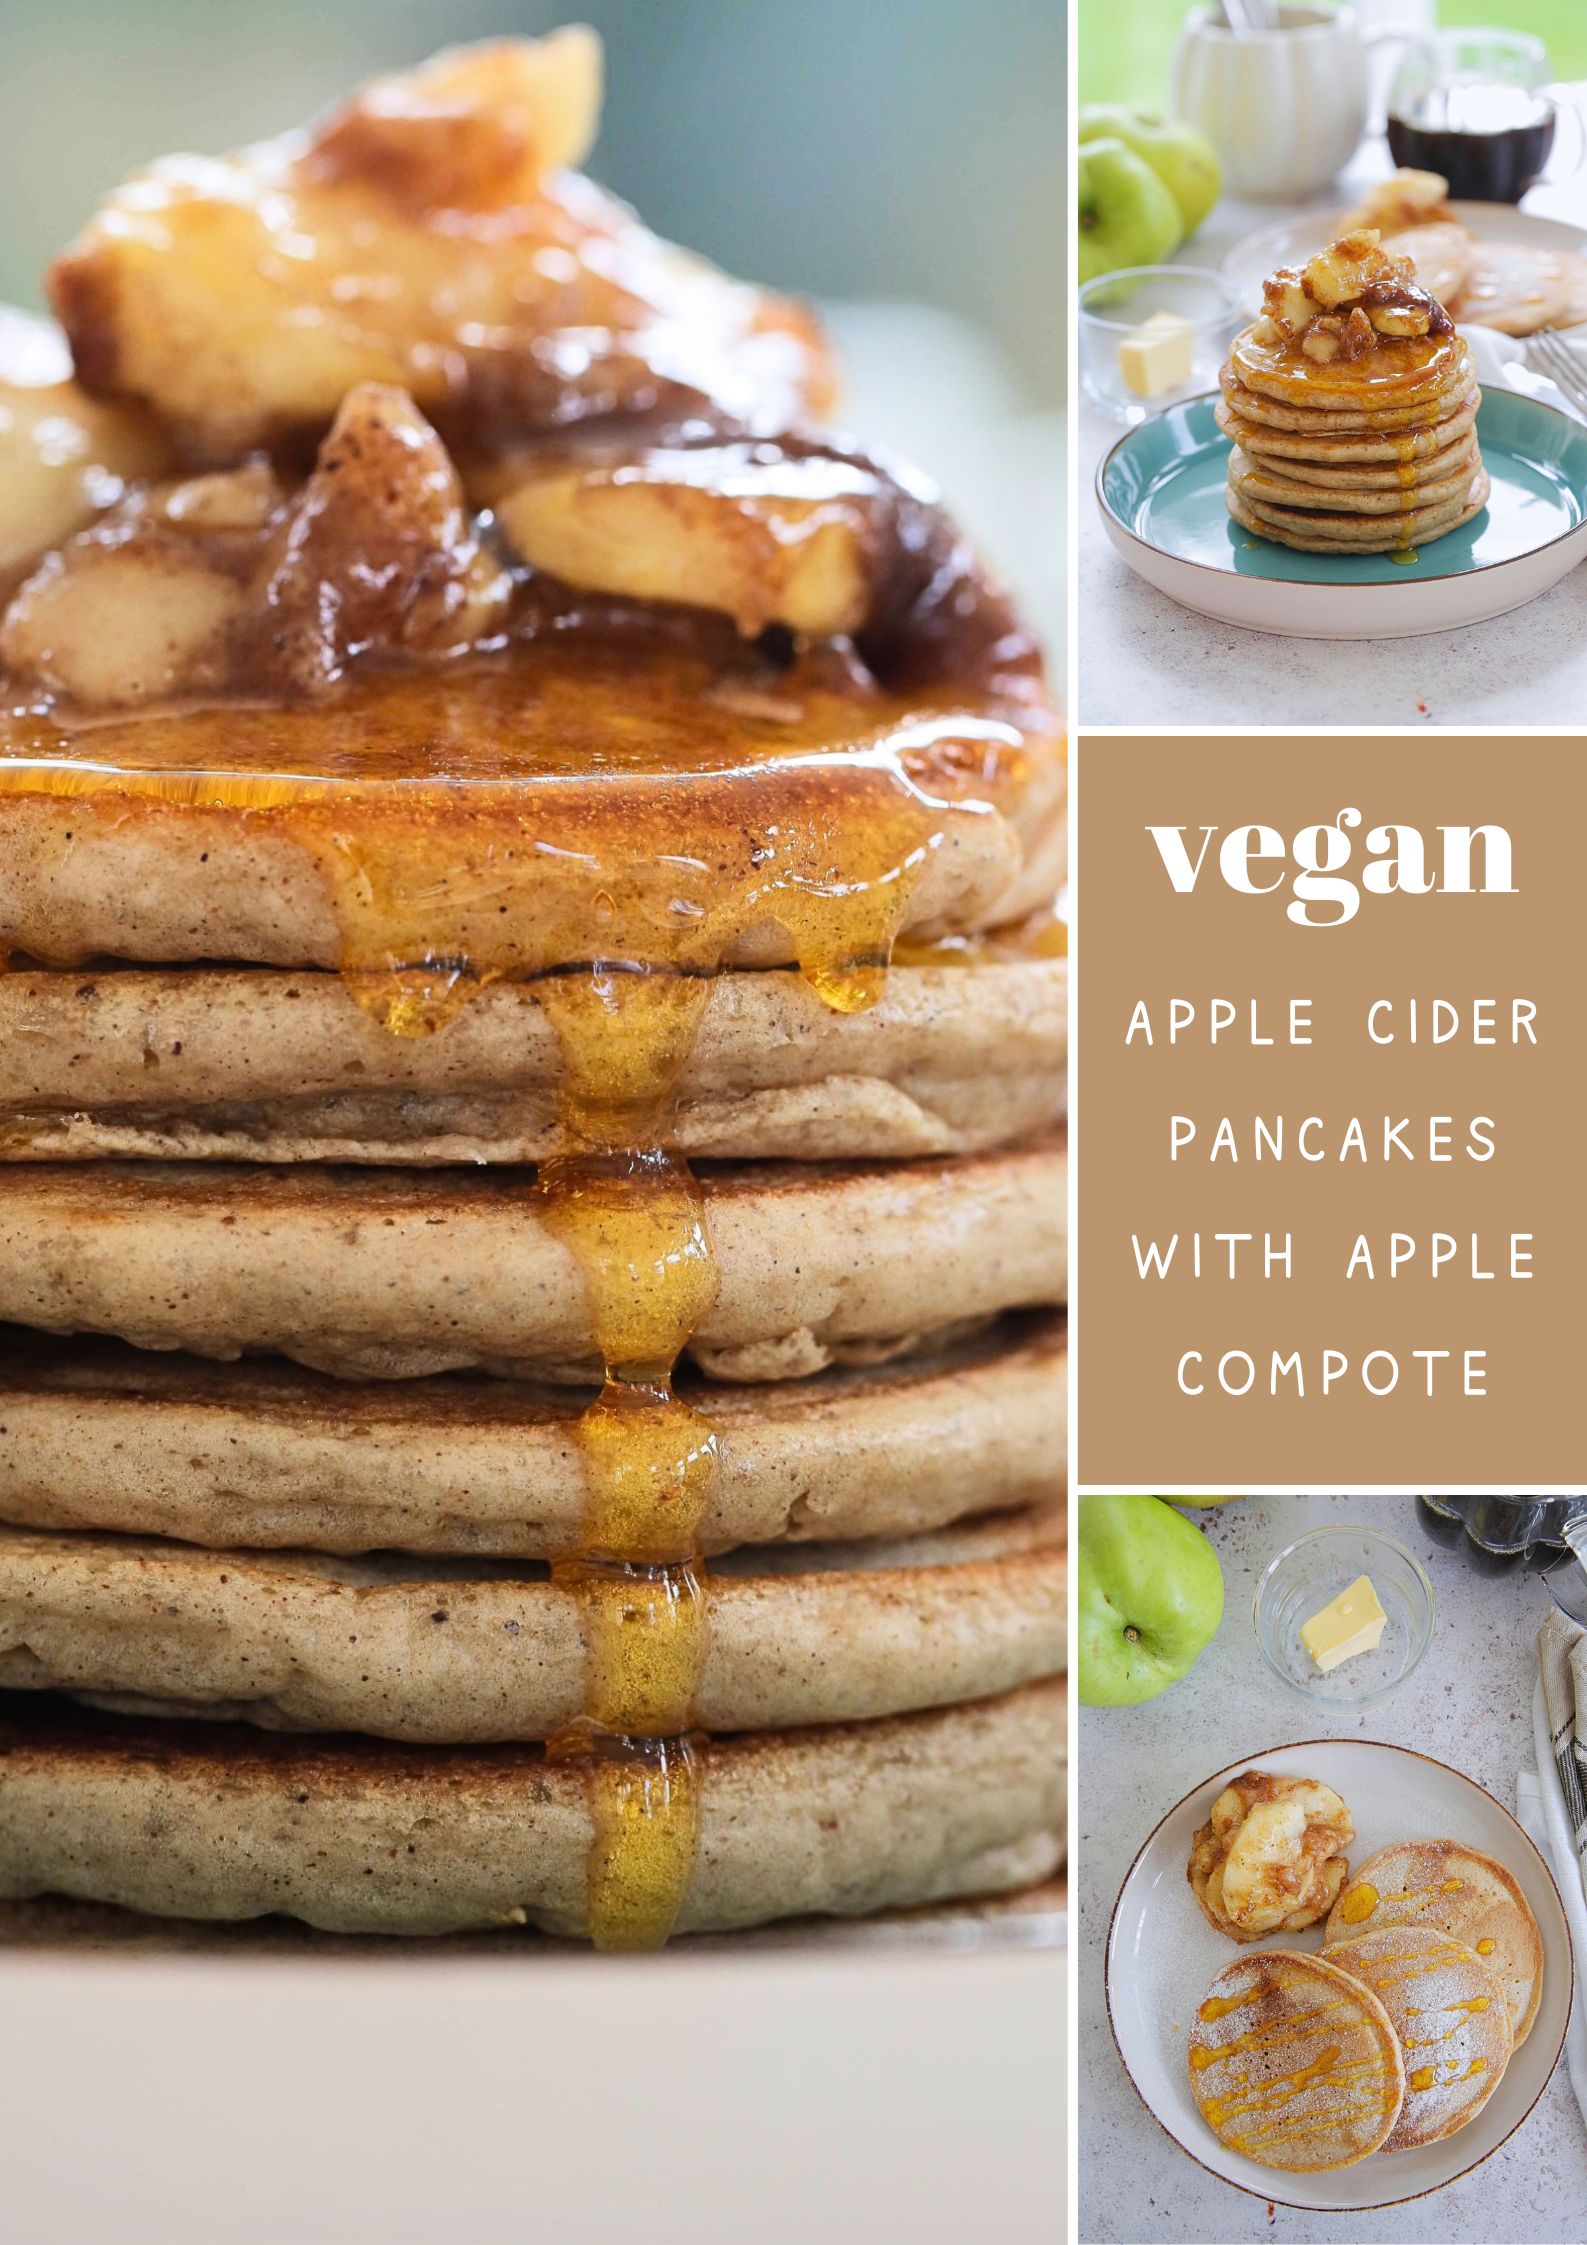 Sweet and fluffy vegan apple cider pancakes topped with a spiced apple compote. Perfect autumn weekend breakfast! Recipe on thecookandhim.com #appleciderpancakes #applepancakes #veganpancakes #eggfreepancakes #veganbreakfast #autumnrecipes